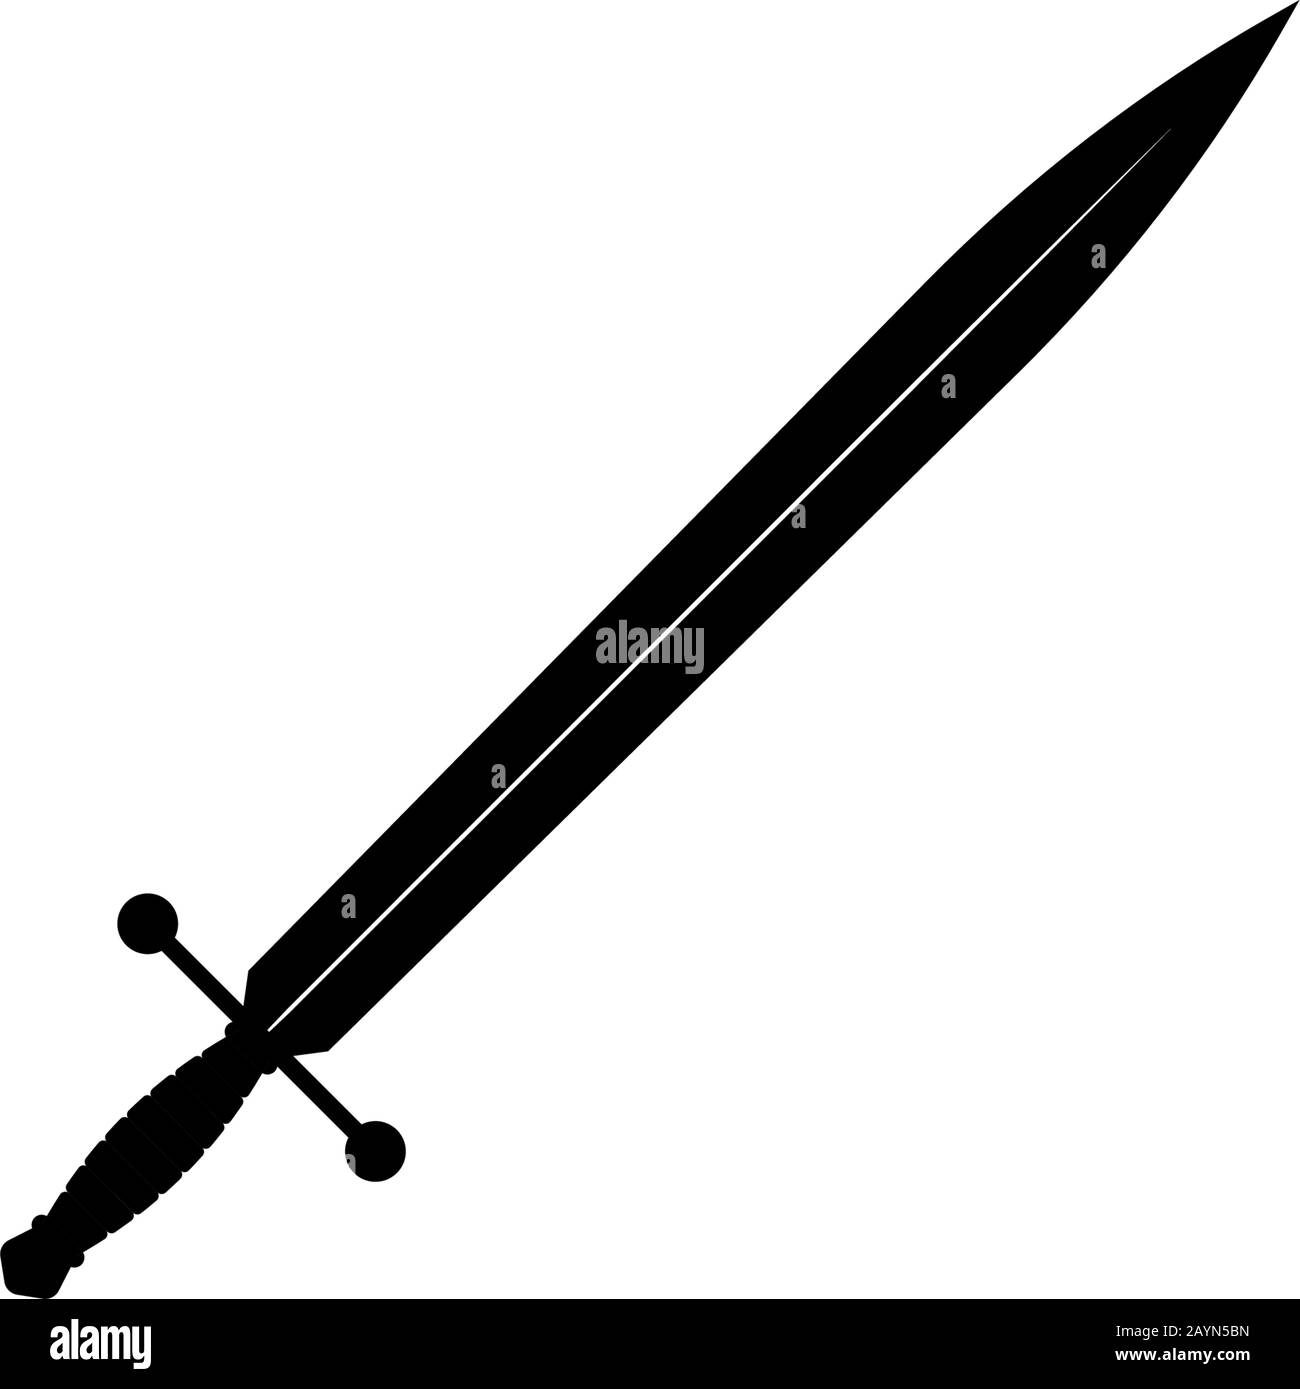 Sword isolated on white background. Military sword ancient weapon design silhouette. Vector illustration, Simple Icon. Daggers and Knifes Hand Drawn. Stock Vector